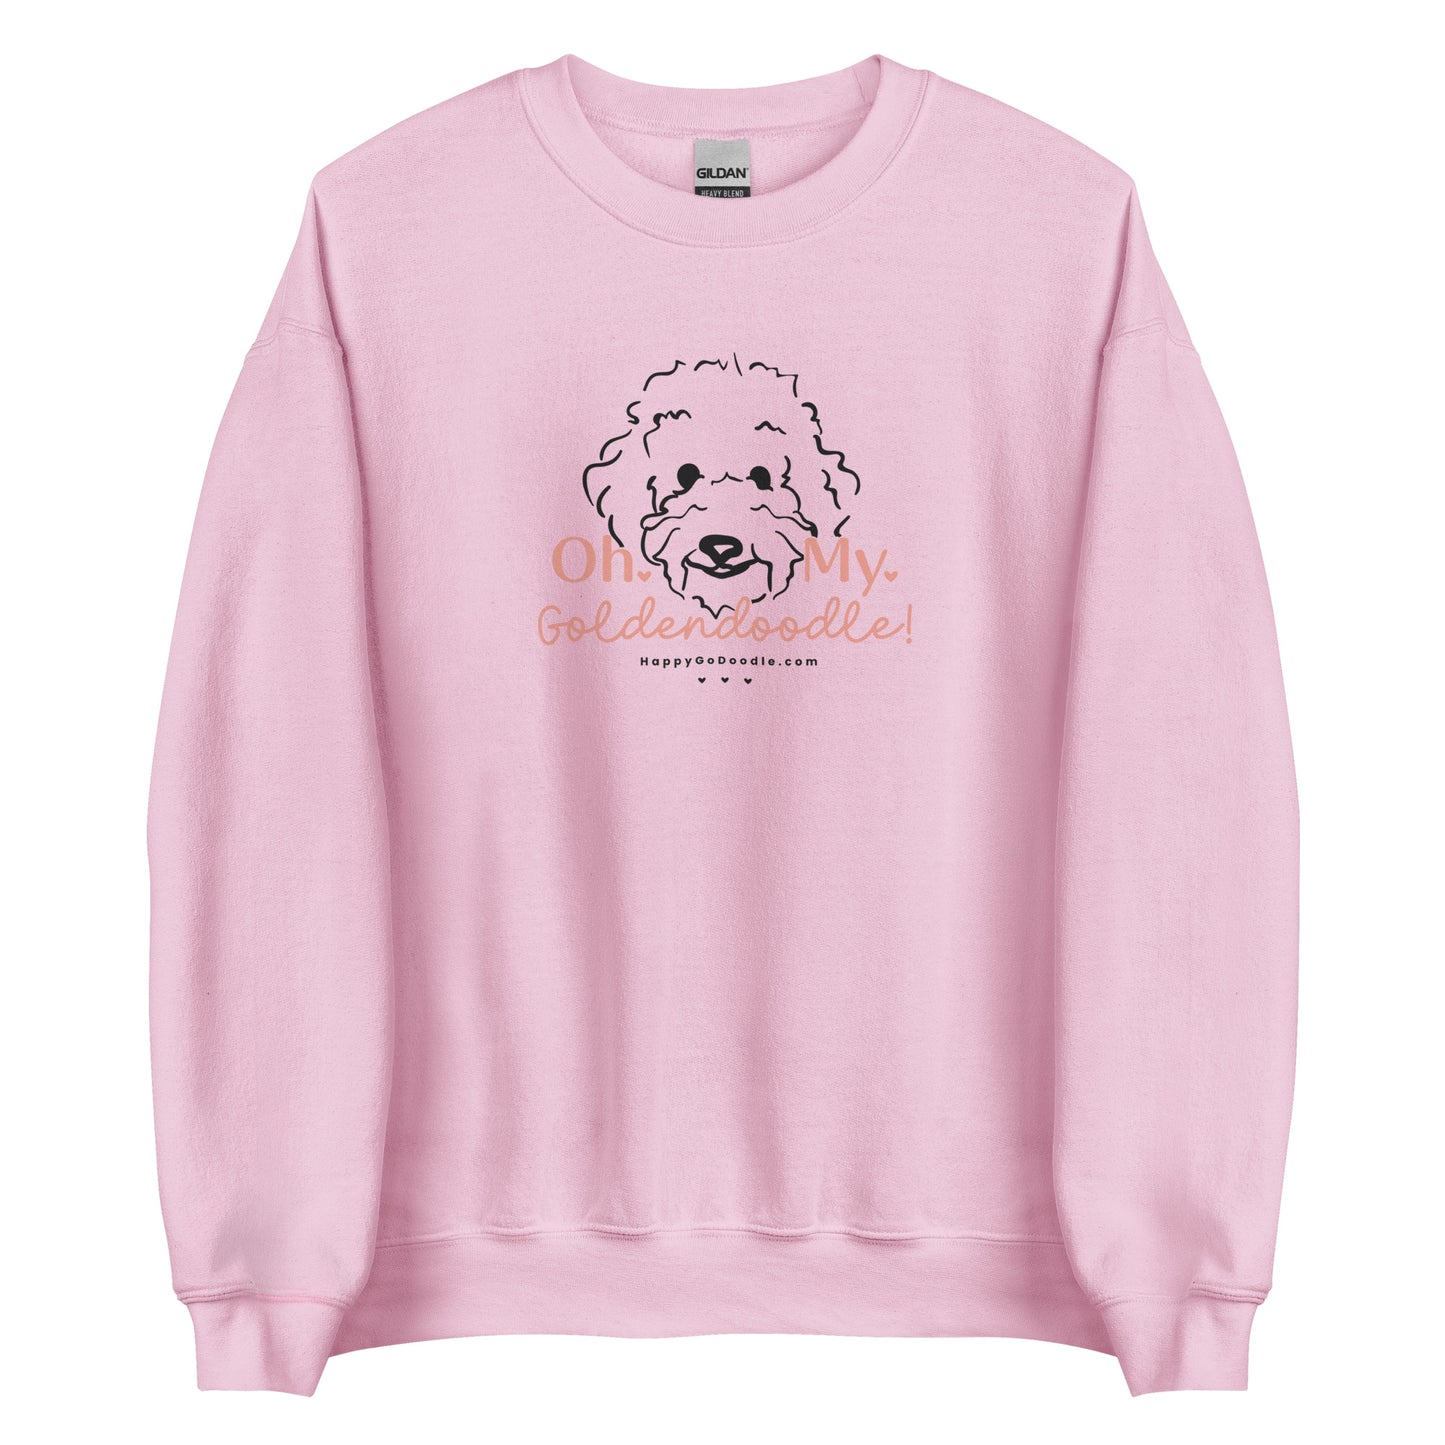 Goldendoodle crew neck sweatshirt with Goldendoodle face and words "Oh My Goldendoodle" in pink